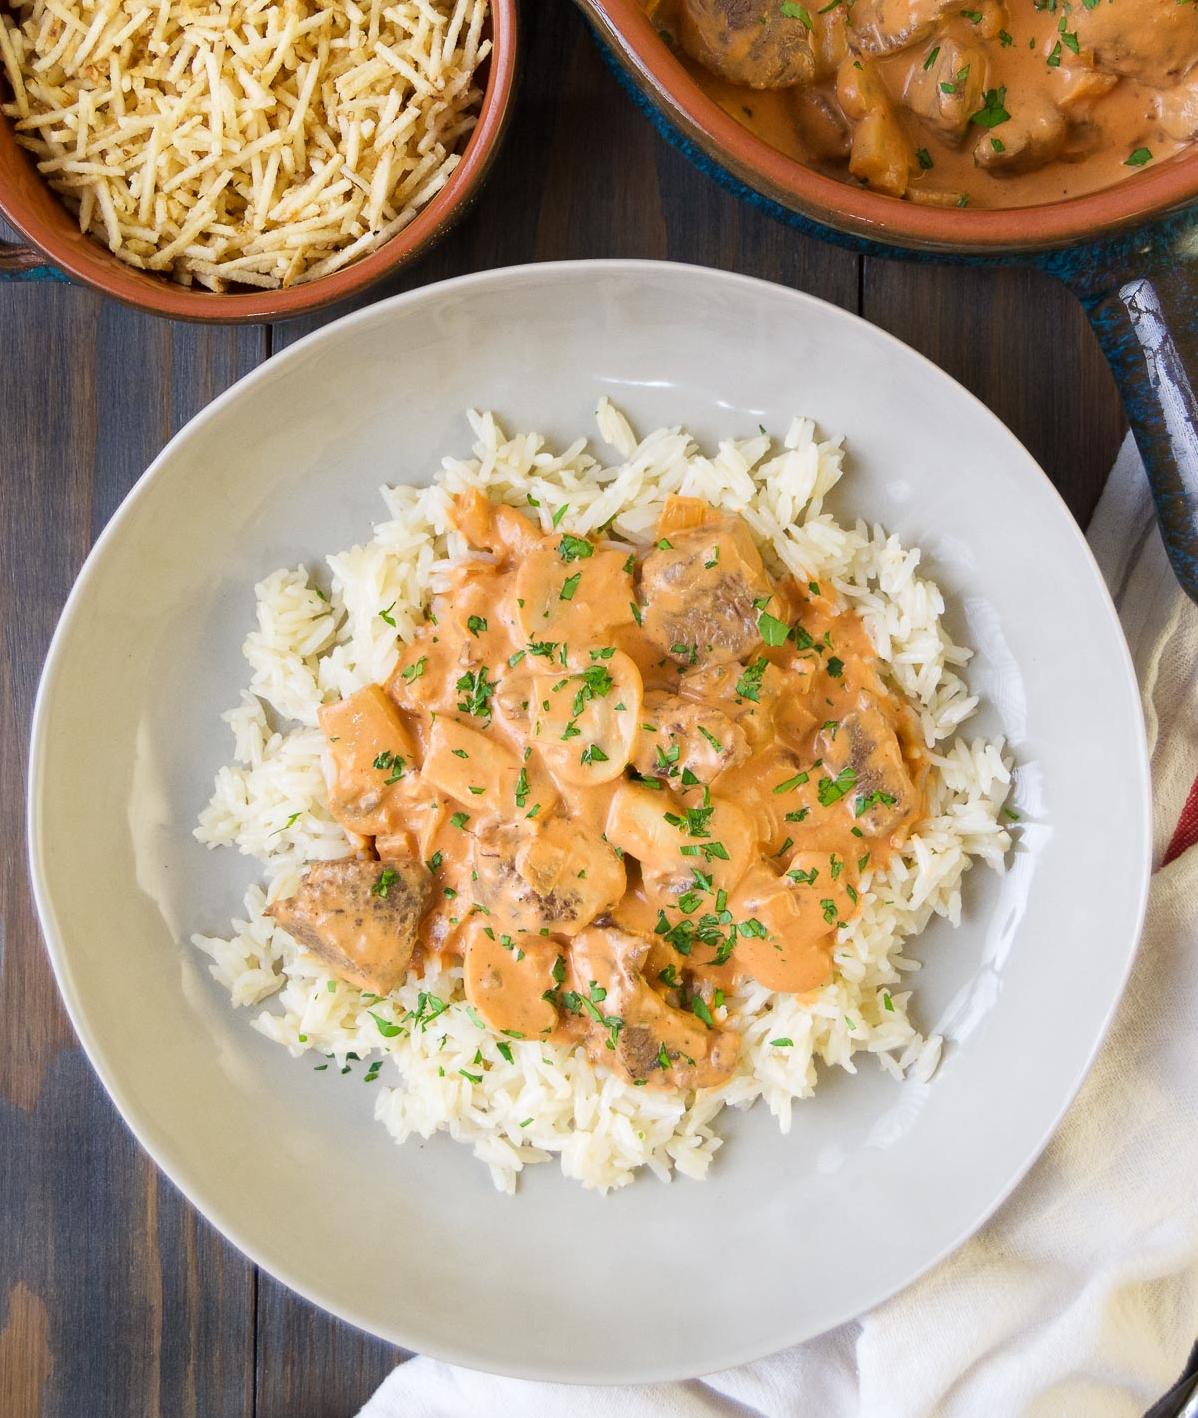  The creamy, rich sauce balanced with tangy tomato makes every bite divine.